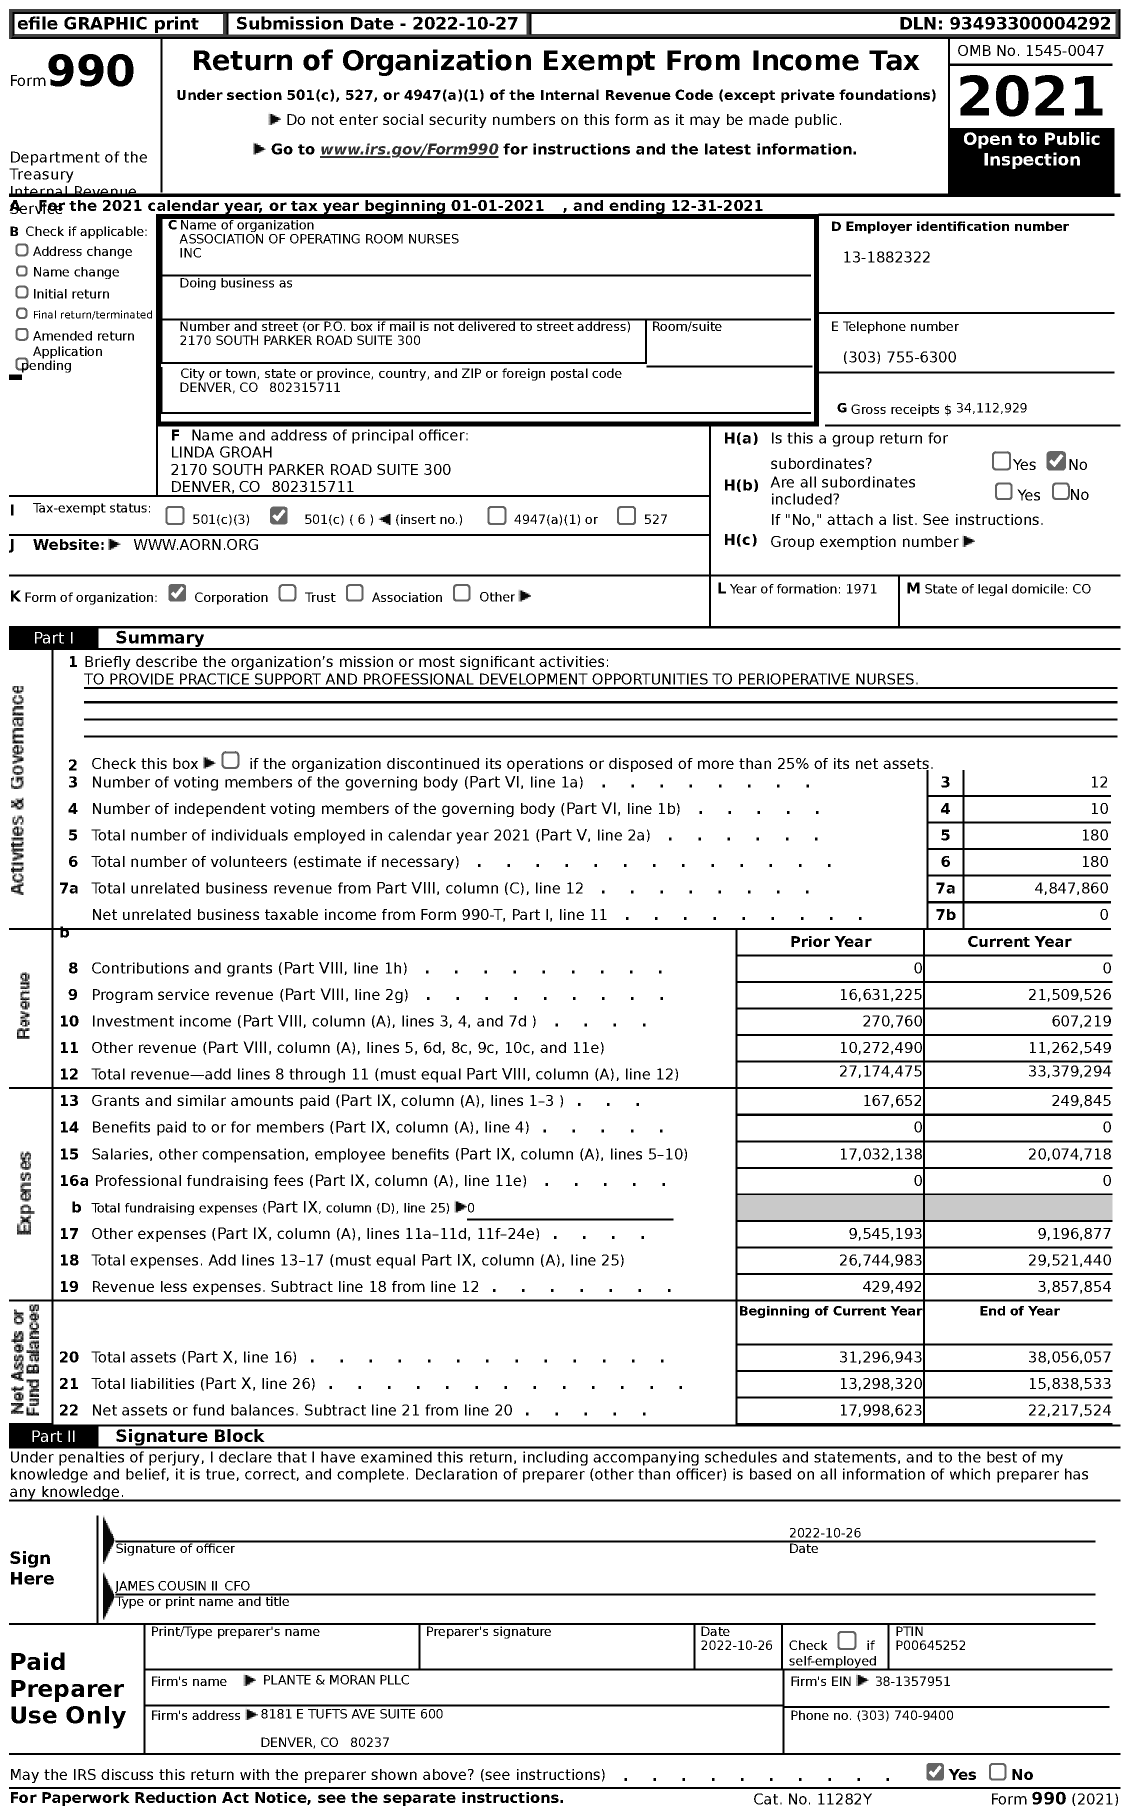 Image of first page of 2021 Form 990 for Association of periOperative Registered Nurses (AORN)